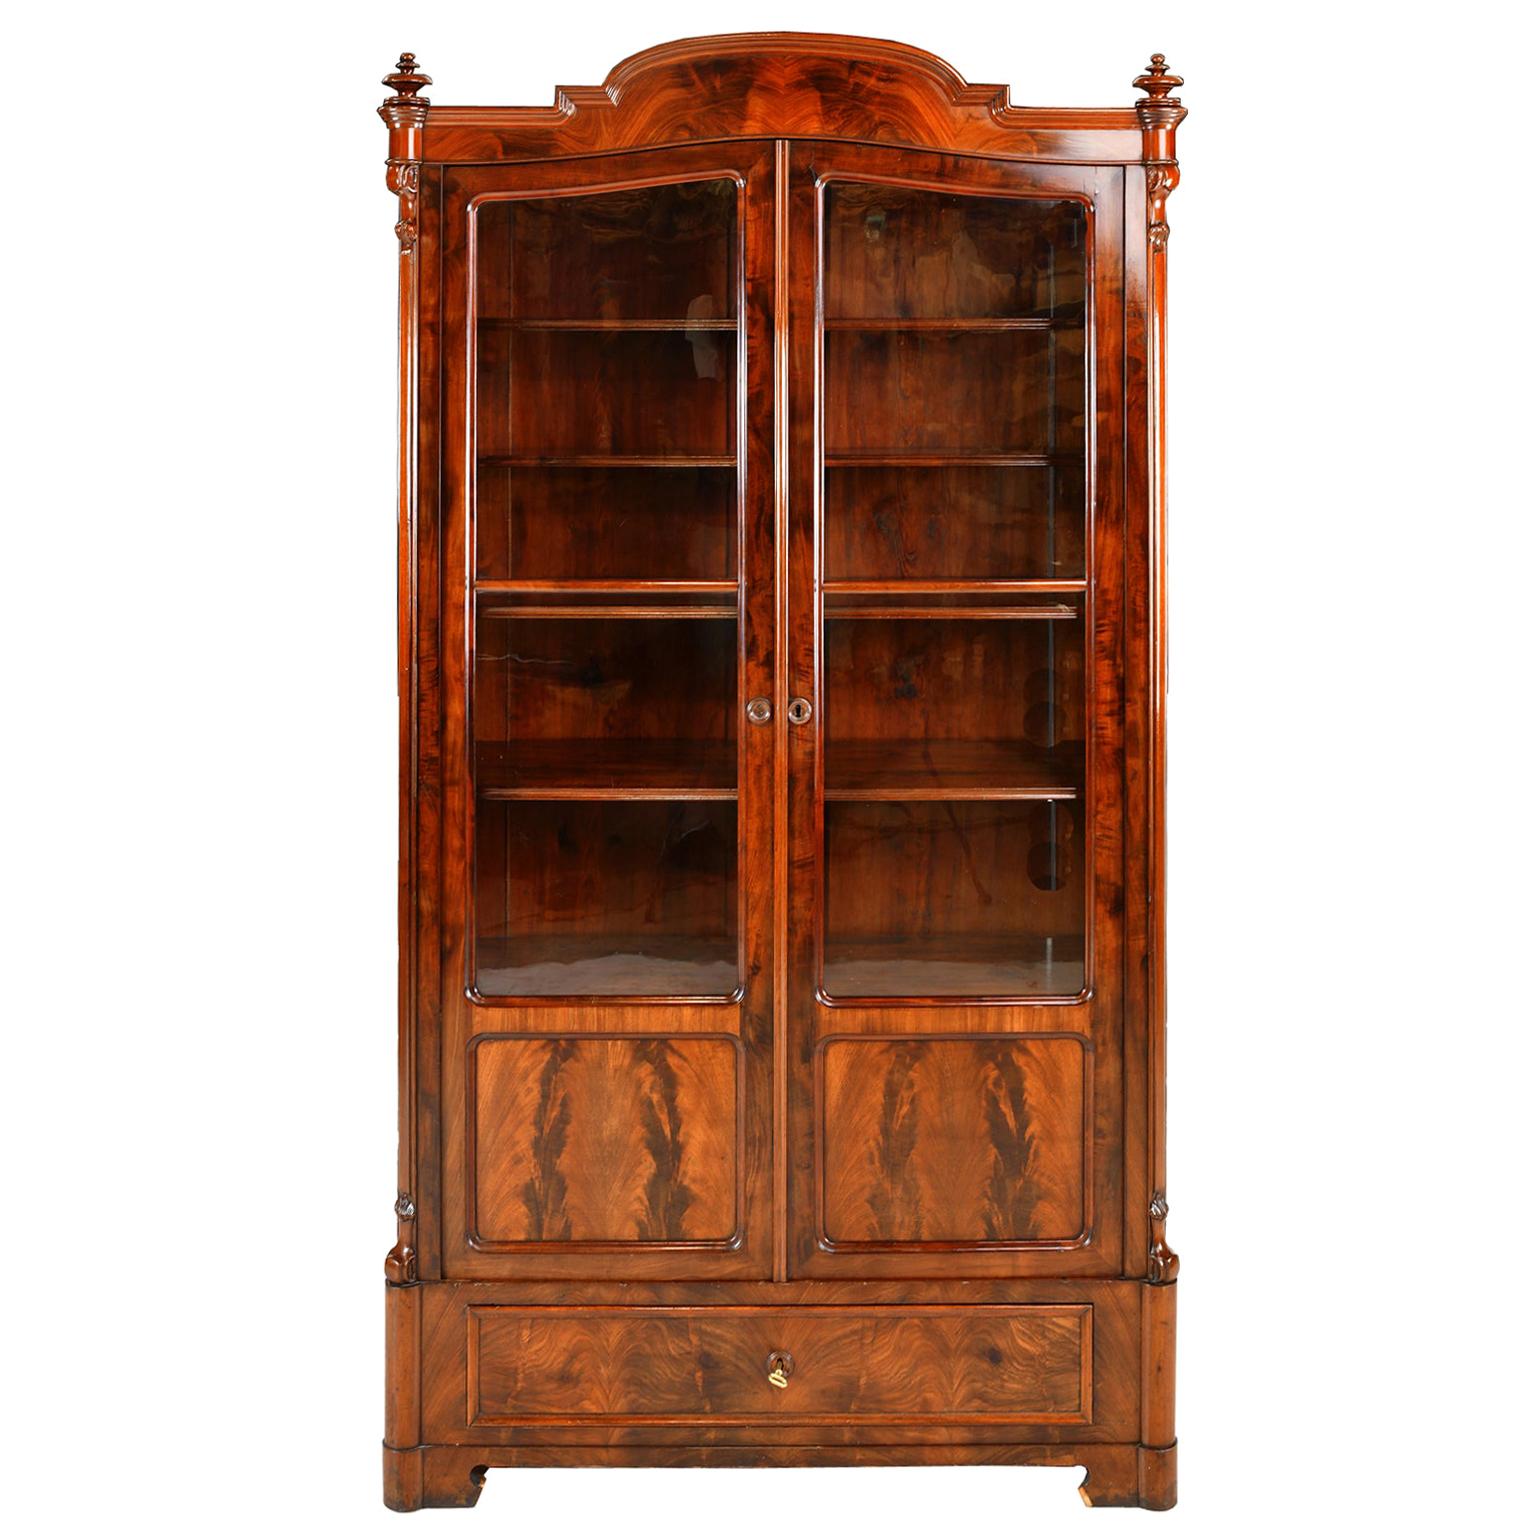 Antique Louis Philippe Bookcase / Vitrine in West Indies Mahogany, German